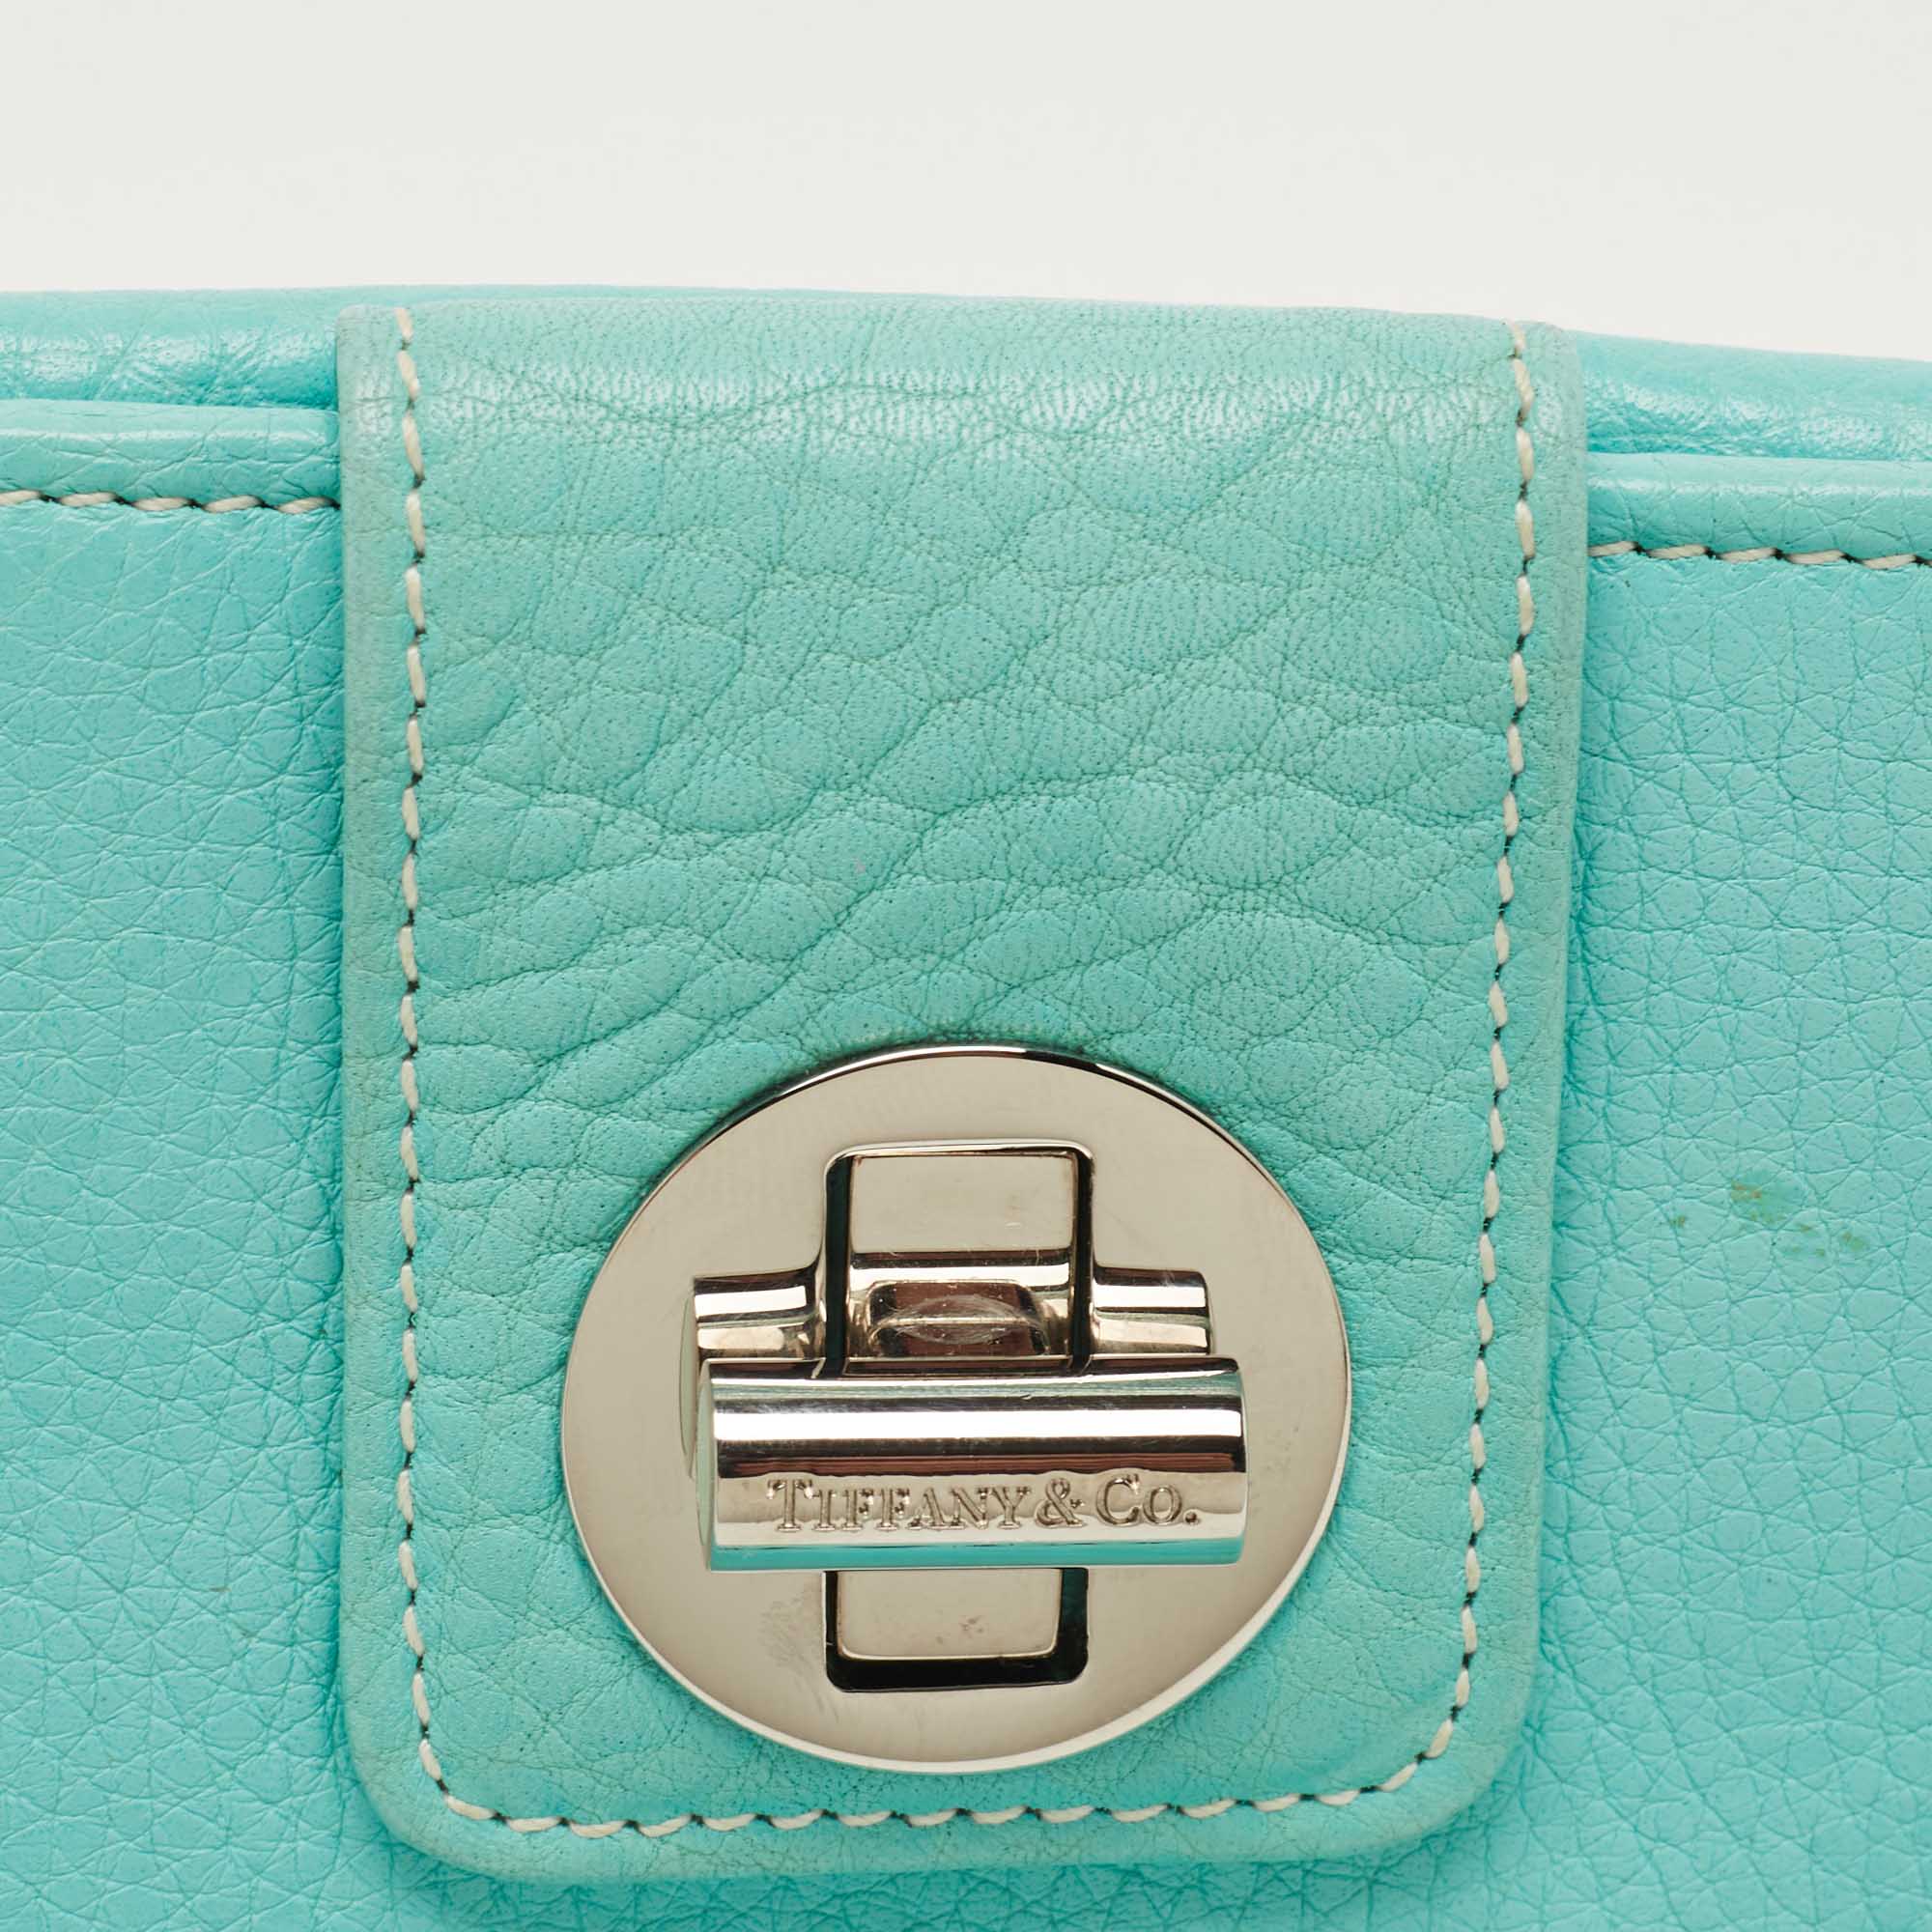 Tiffany & Co.Turquoise Leather Turnlock French Wallet